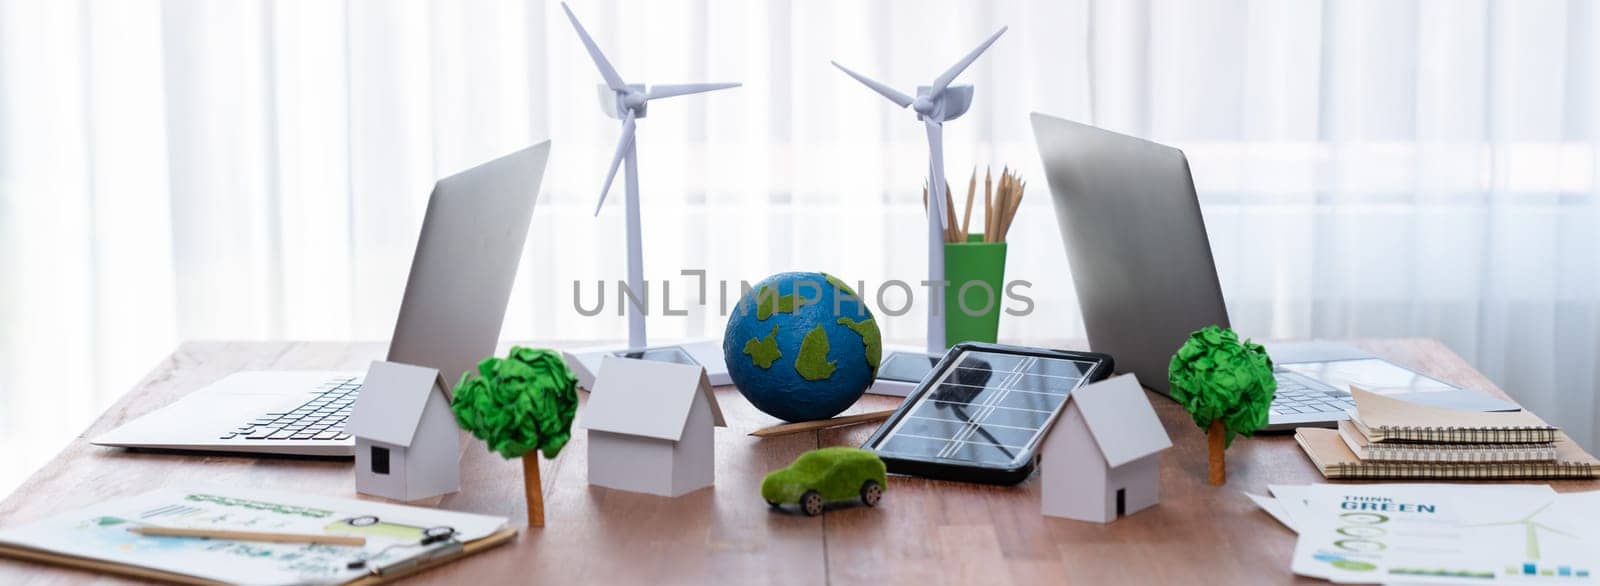 Environment friendly company office table with various eco mockup for environmental conservative concept. Green business with zero net reducing impact on global warming. Trailblazing